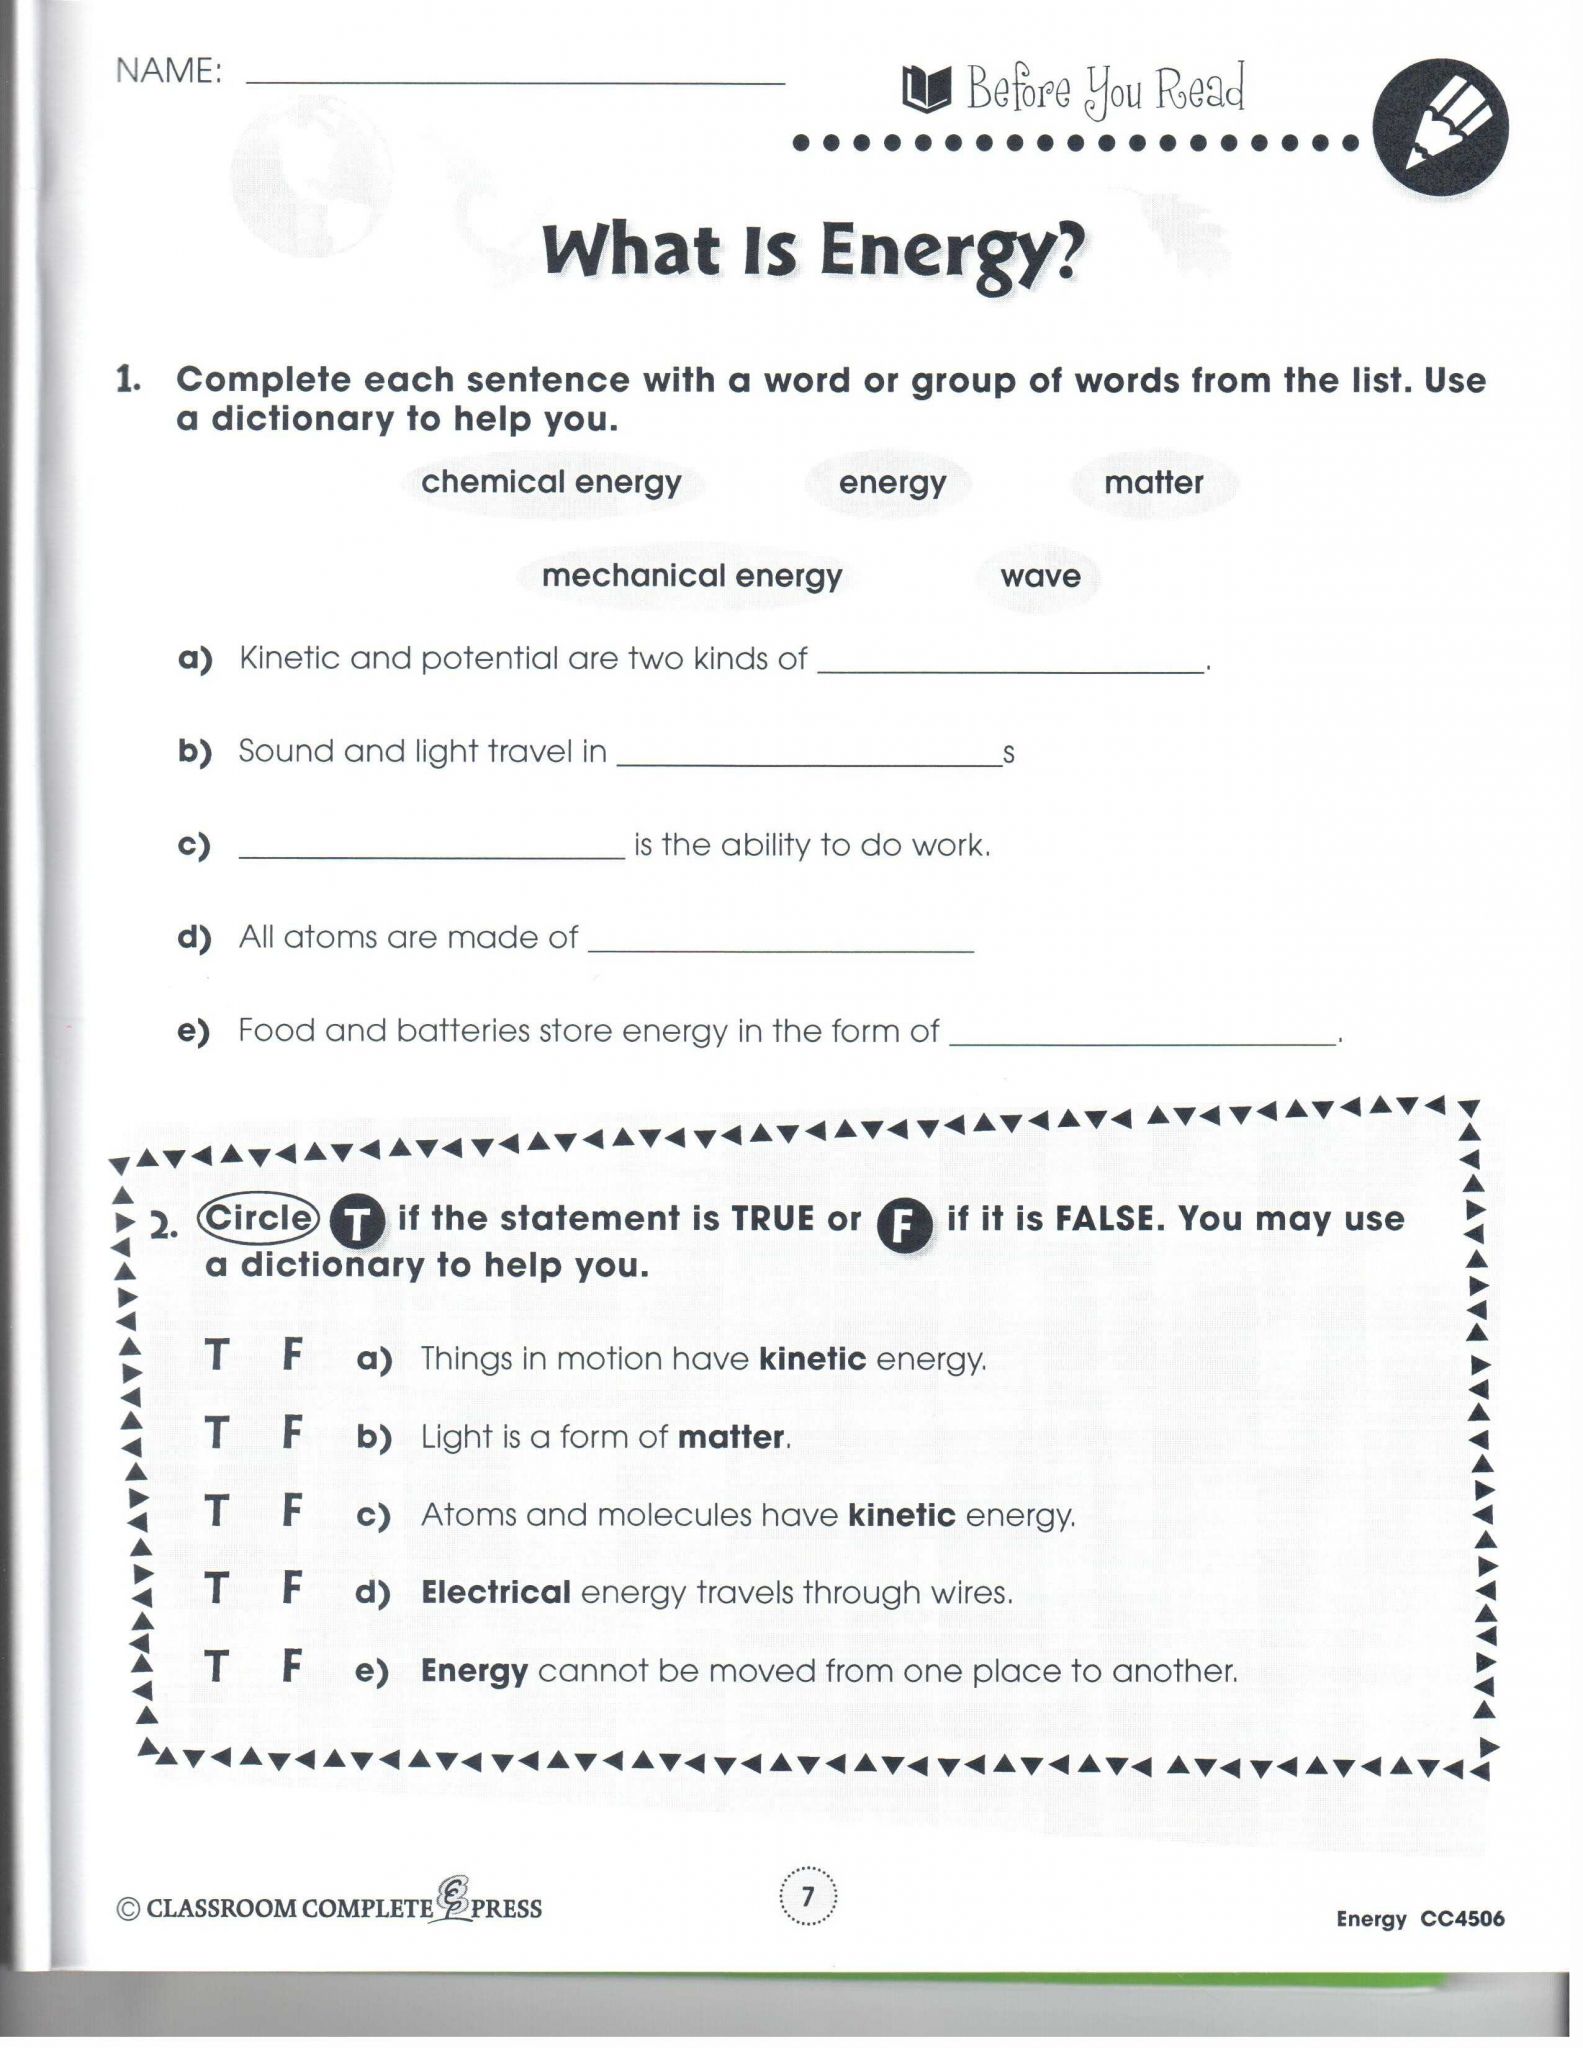 Physical Science Worksheet Conservation Of Energy 2 Answer Key as Well as Science Worksheet Heat Energy New Kids Science Energy Worksheets